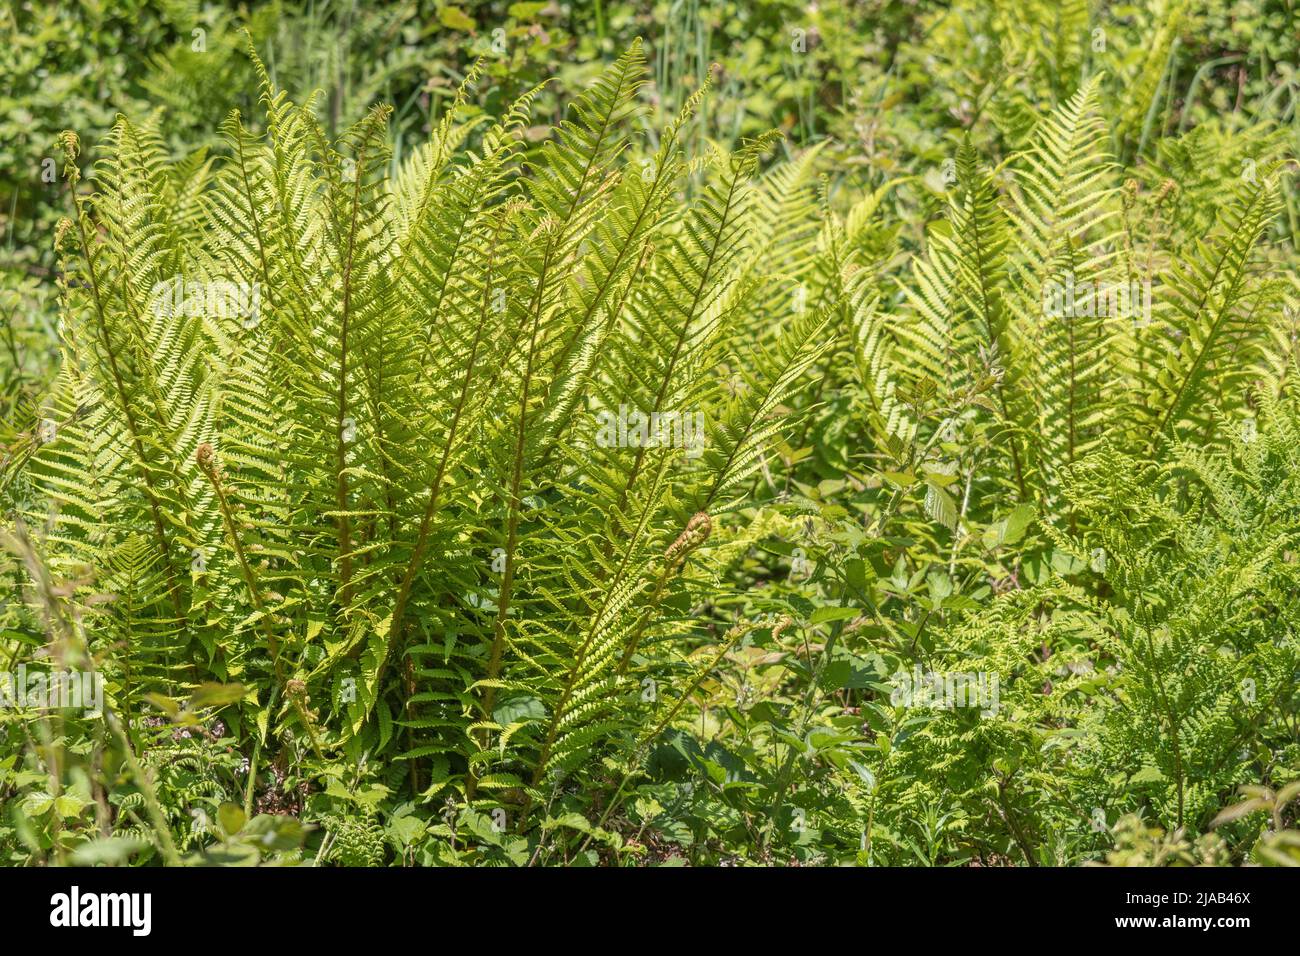 Unidentified species of fern in Cornwall hedgerow in early summer sunshine. For fern fronds, pteridology, leaf tufts. Some ferns were used medicinally. Stock Photo